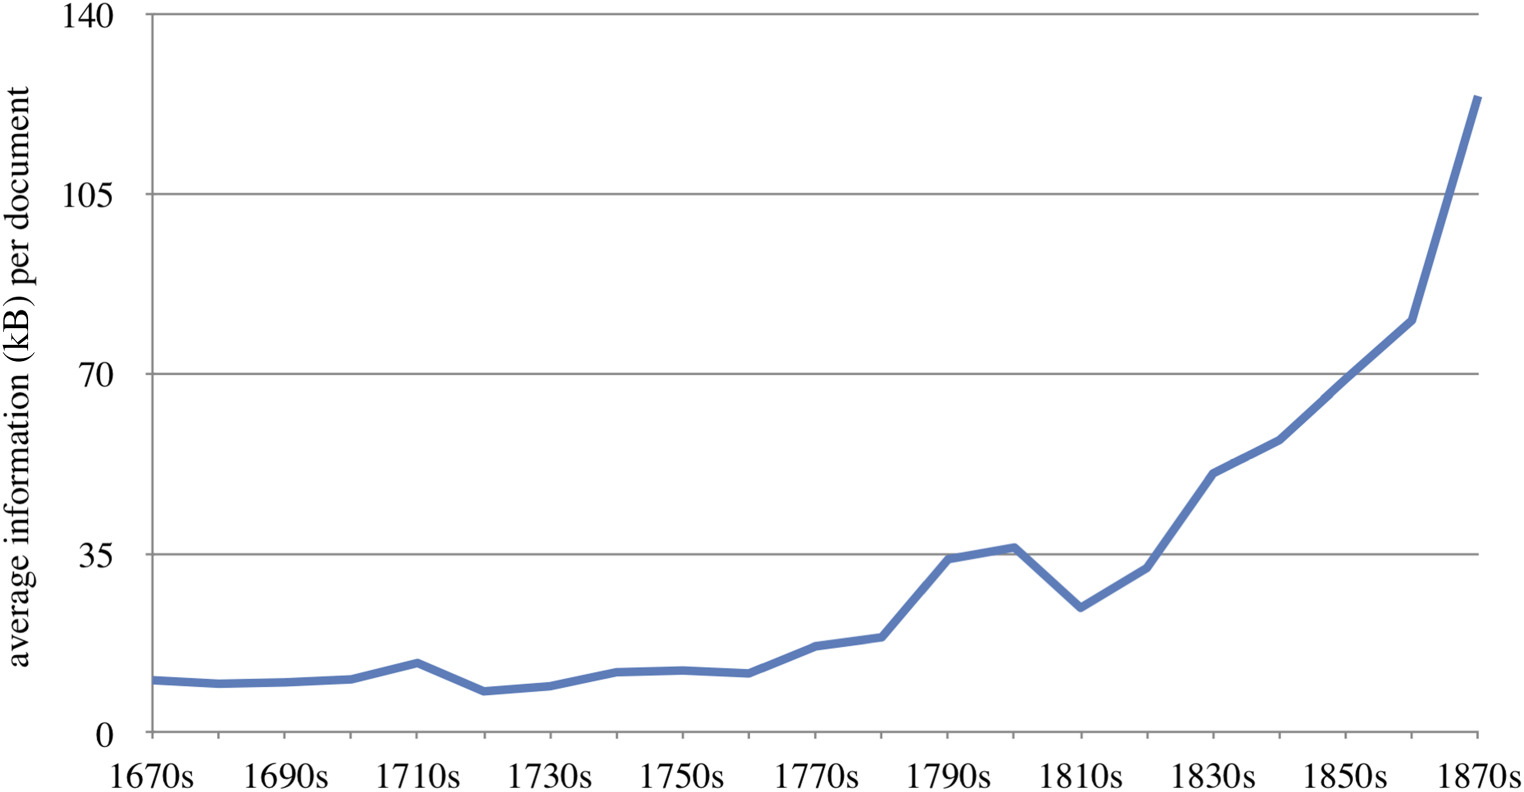 Average information quantity of documents published in the Philosophical Transactions per decade